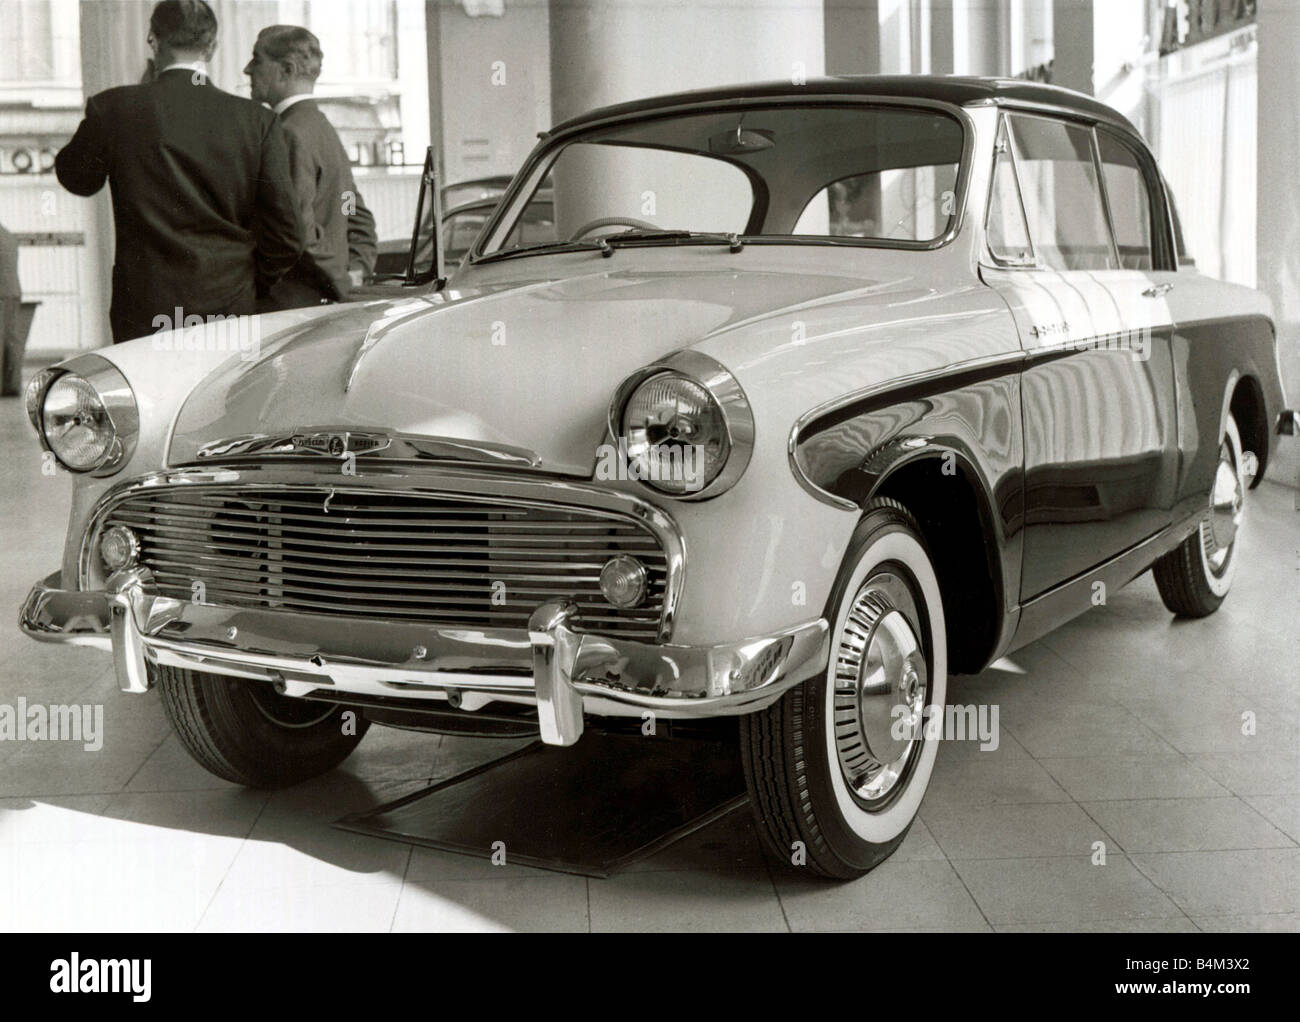 Sunbeam Rapier New saloon car with a sports car performance announced by the Rootes Group 4 5 seater motor car automobile Top speed of around 90 mph Light steering DM G5493 1 13 10 1955 October 1955 1950s Mirrorpix Stock Photo